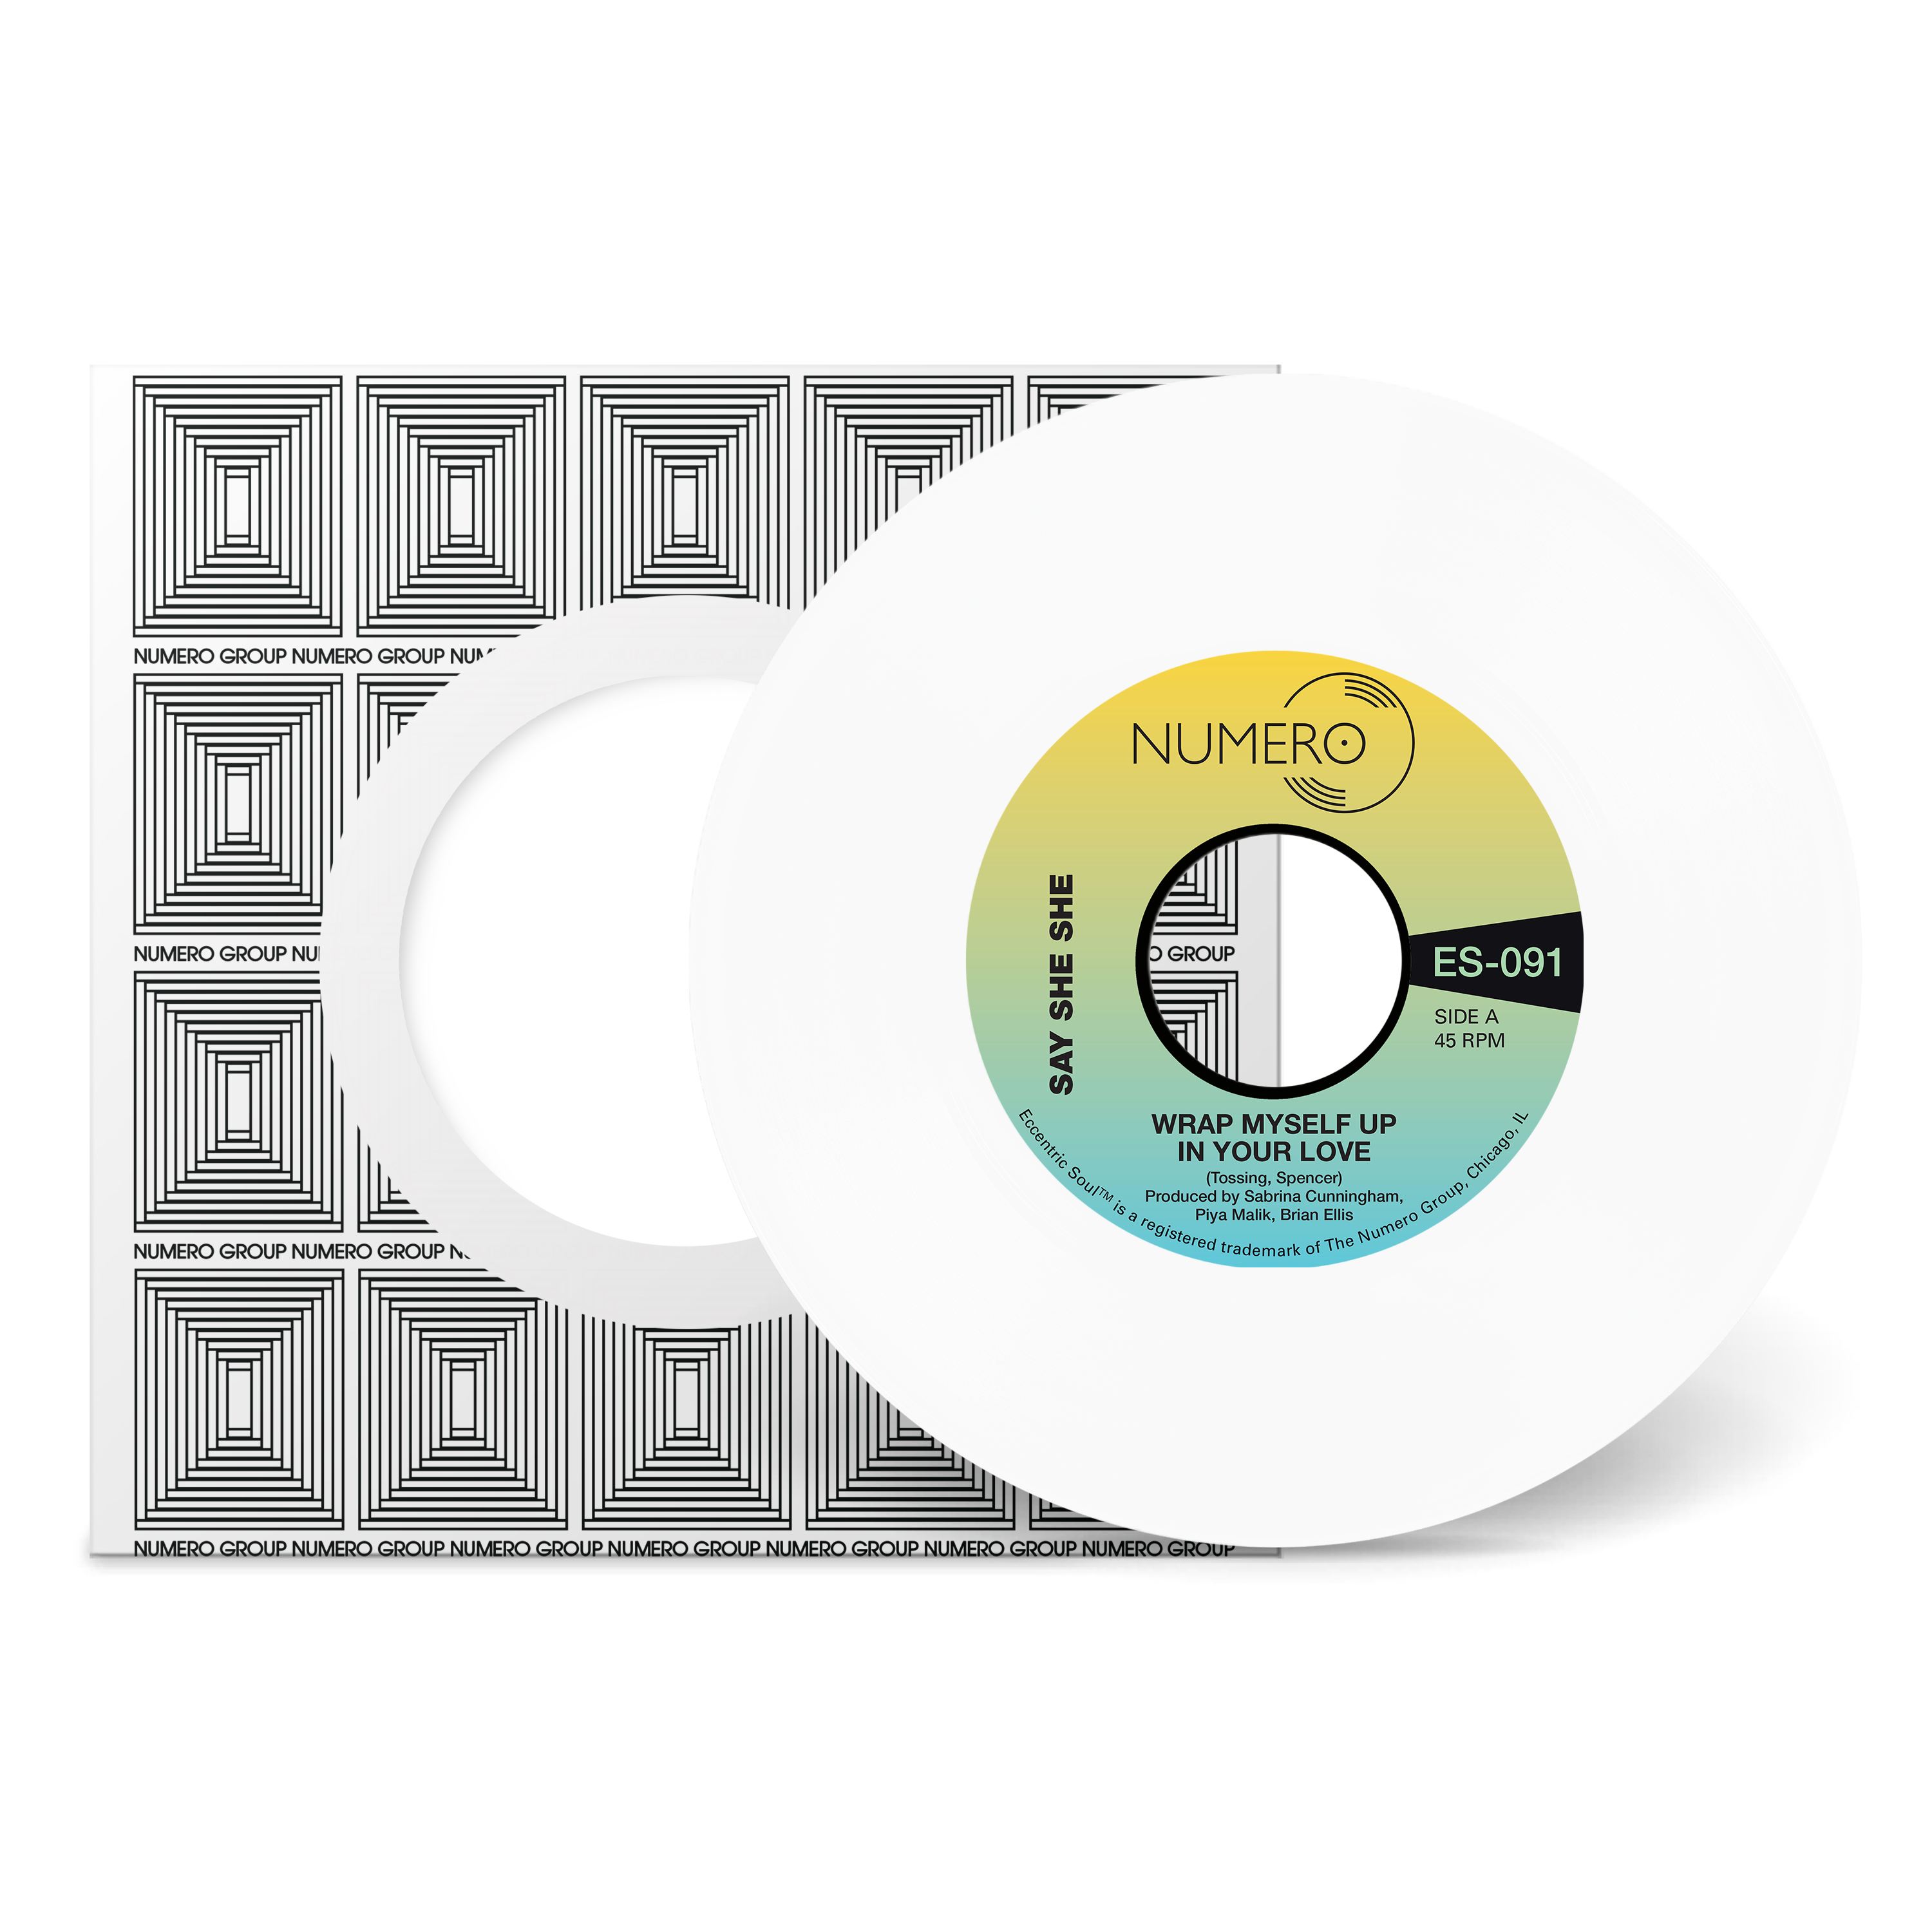 Say She She, Jim Spencer - Wrap Myself Up In Your Love: Limited White Vinyl 7" Single